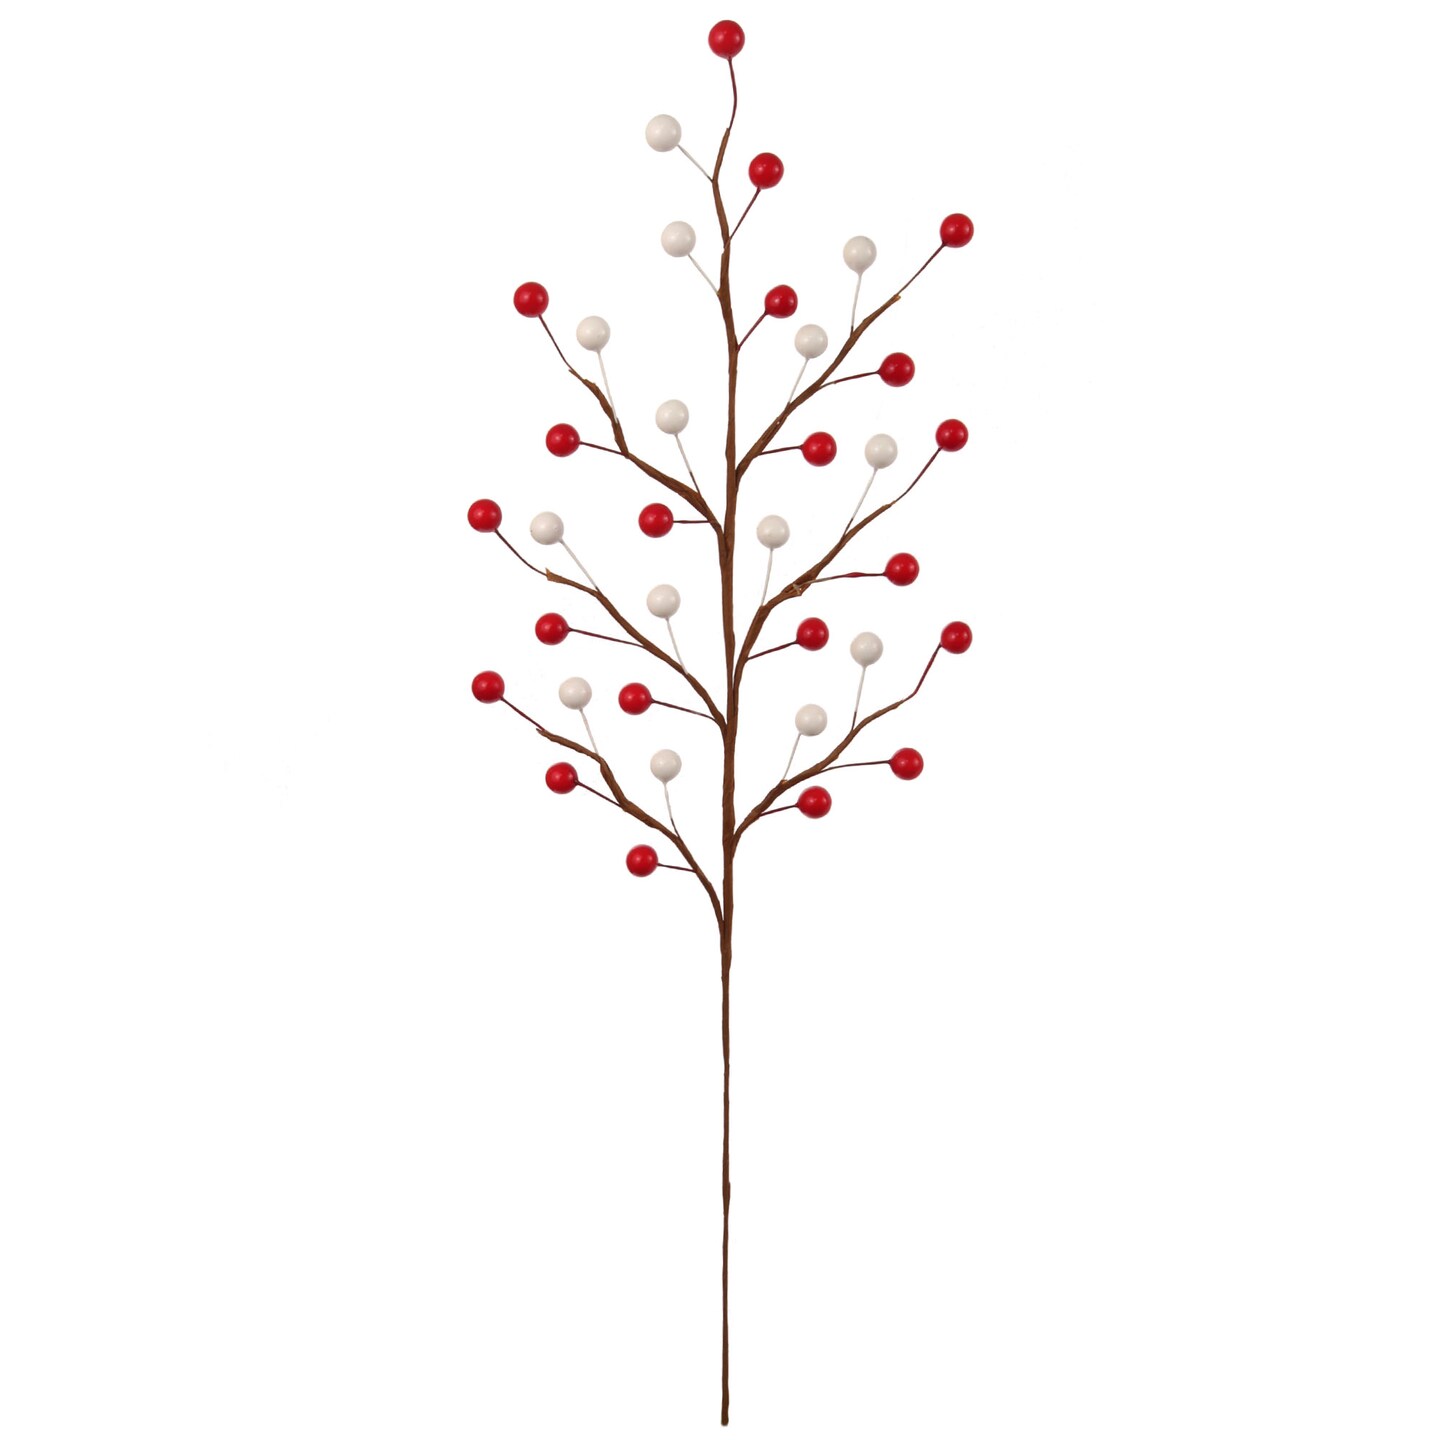  Syhood 24 Pcs Christmas Floral Picks and Sprays Artificial  Christmas Berries Stems Pine Branches Needles for Crafts Christmas Tree  Spray Picks for Xmas DIY Xmas Tree Garland Wreath Ornaments(Red) : Home